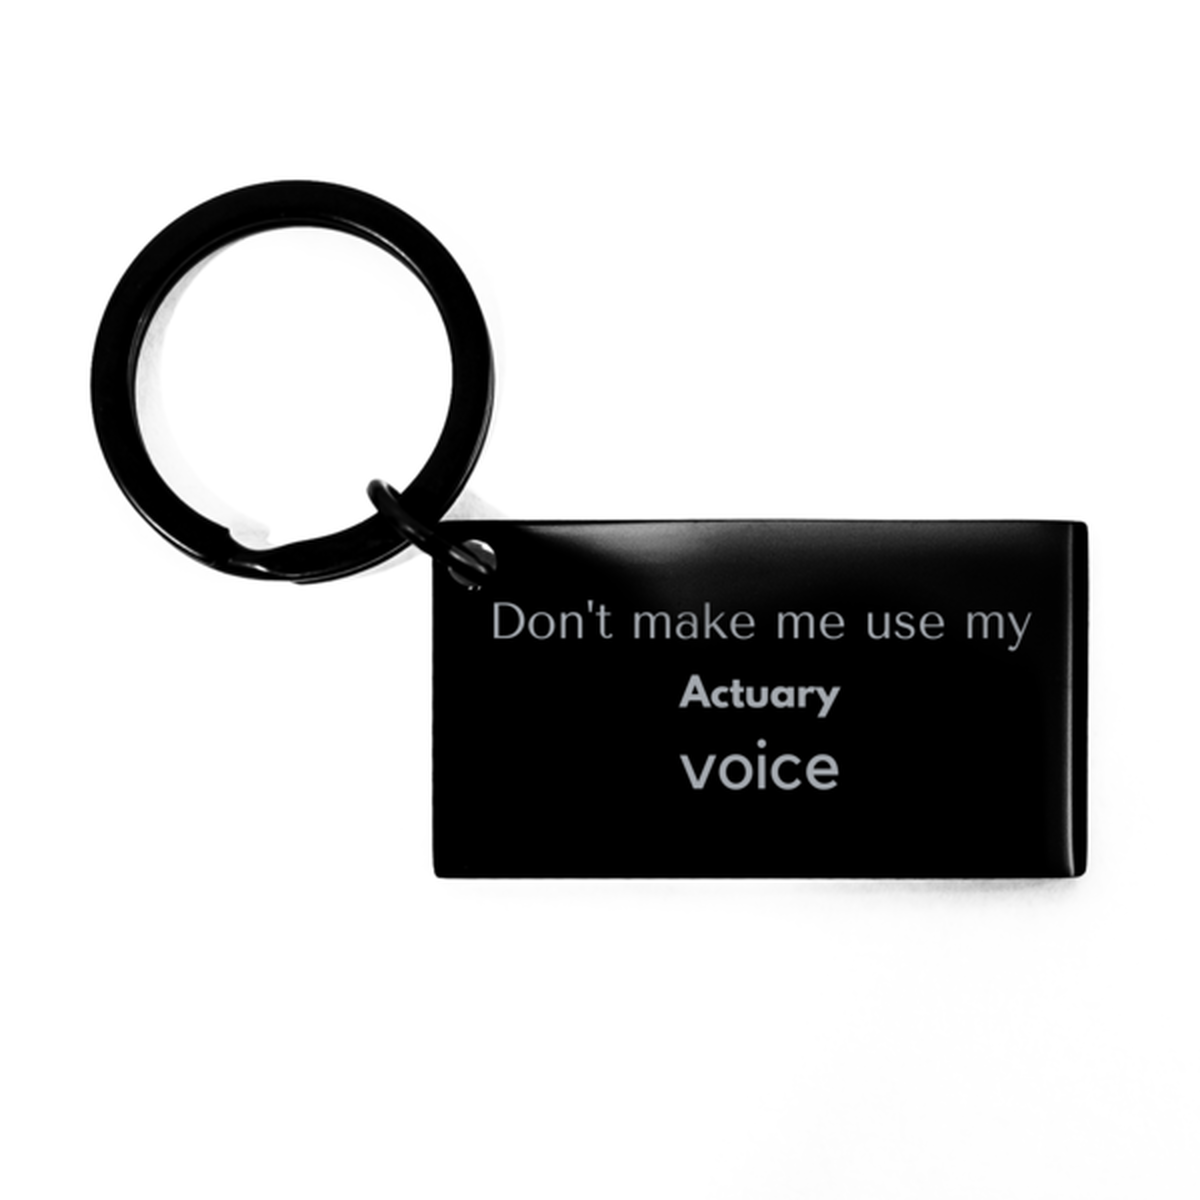 Don't make me use my Actuary voice, Sarcasm Actuary Gifts, Christmas Actuary Keychain Birthday Unique Gifts For Actuary Coworkers, Men, Women, Colleague, Friends